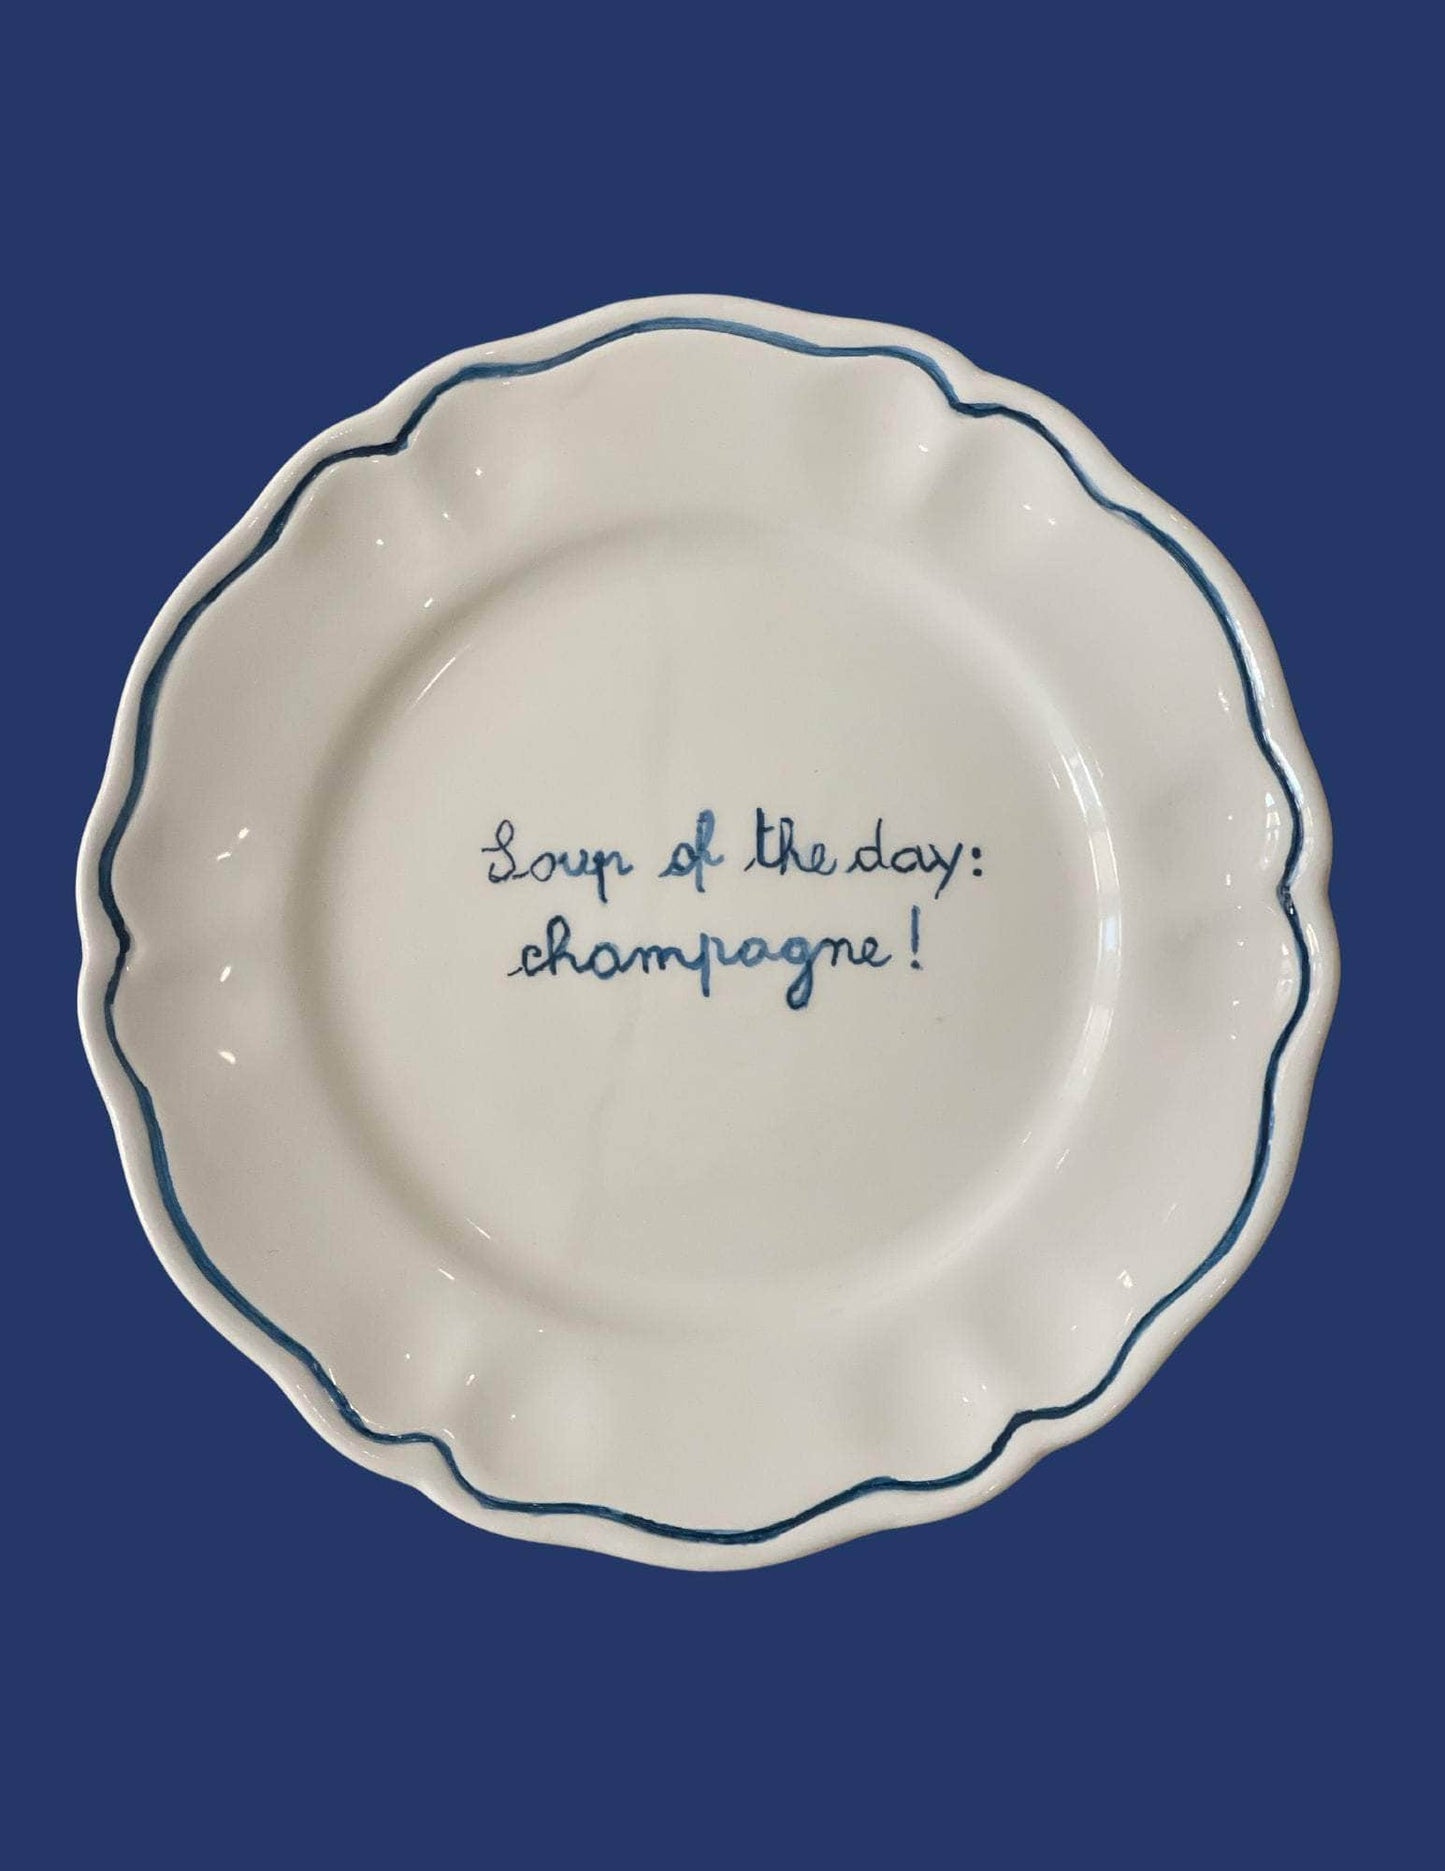 Ceramic "Soup of the day: Champagne!" Scalloped Plate | Set of 6